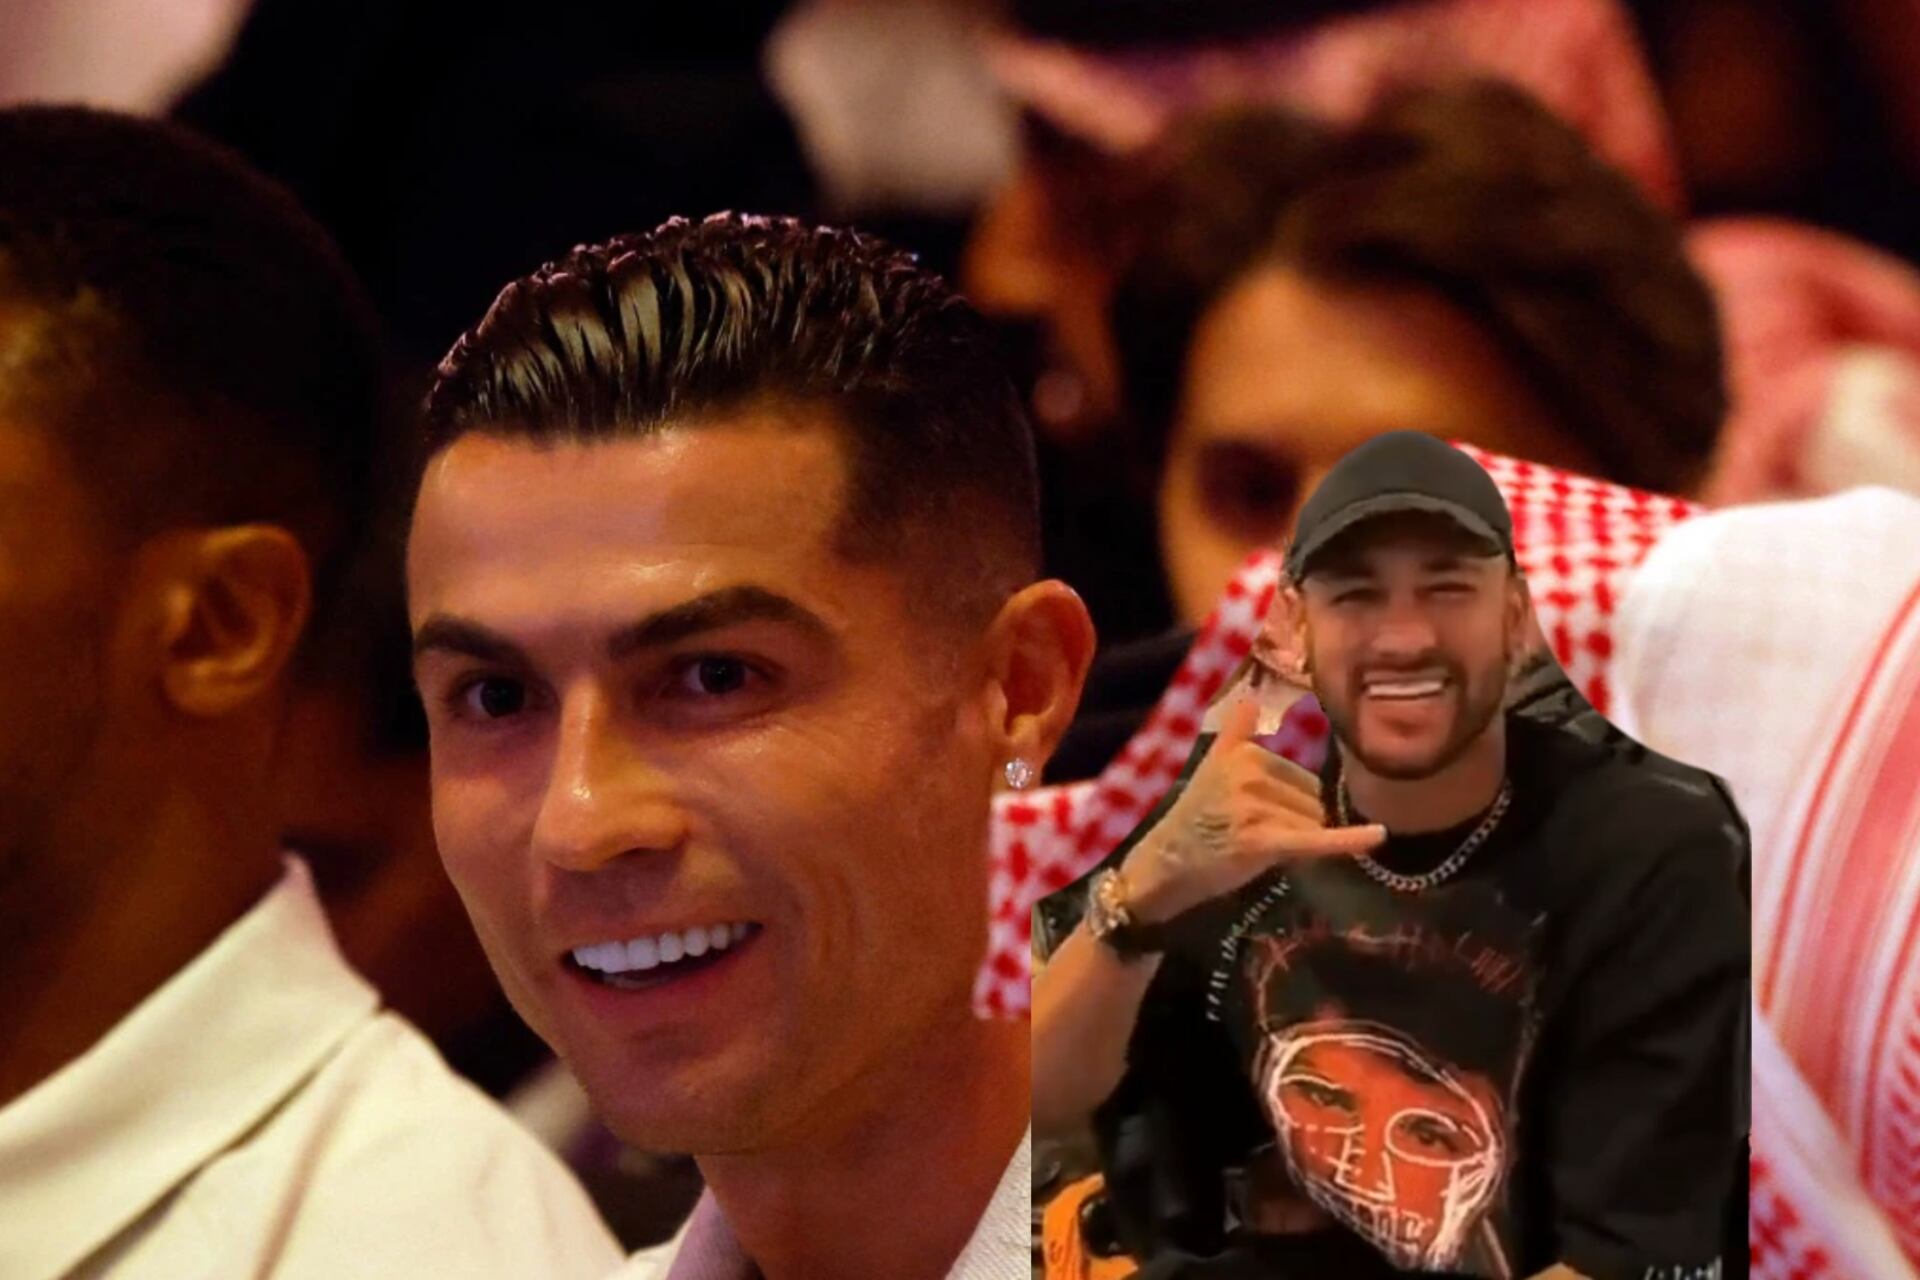 (VIDEO) Cristiano and Neymar met at Arabia, CR7 was worried about Ney’s injury and this is what they talked about